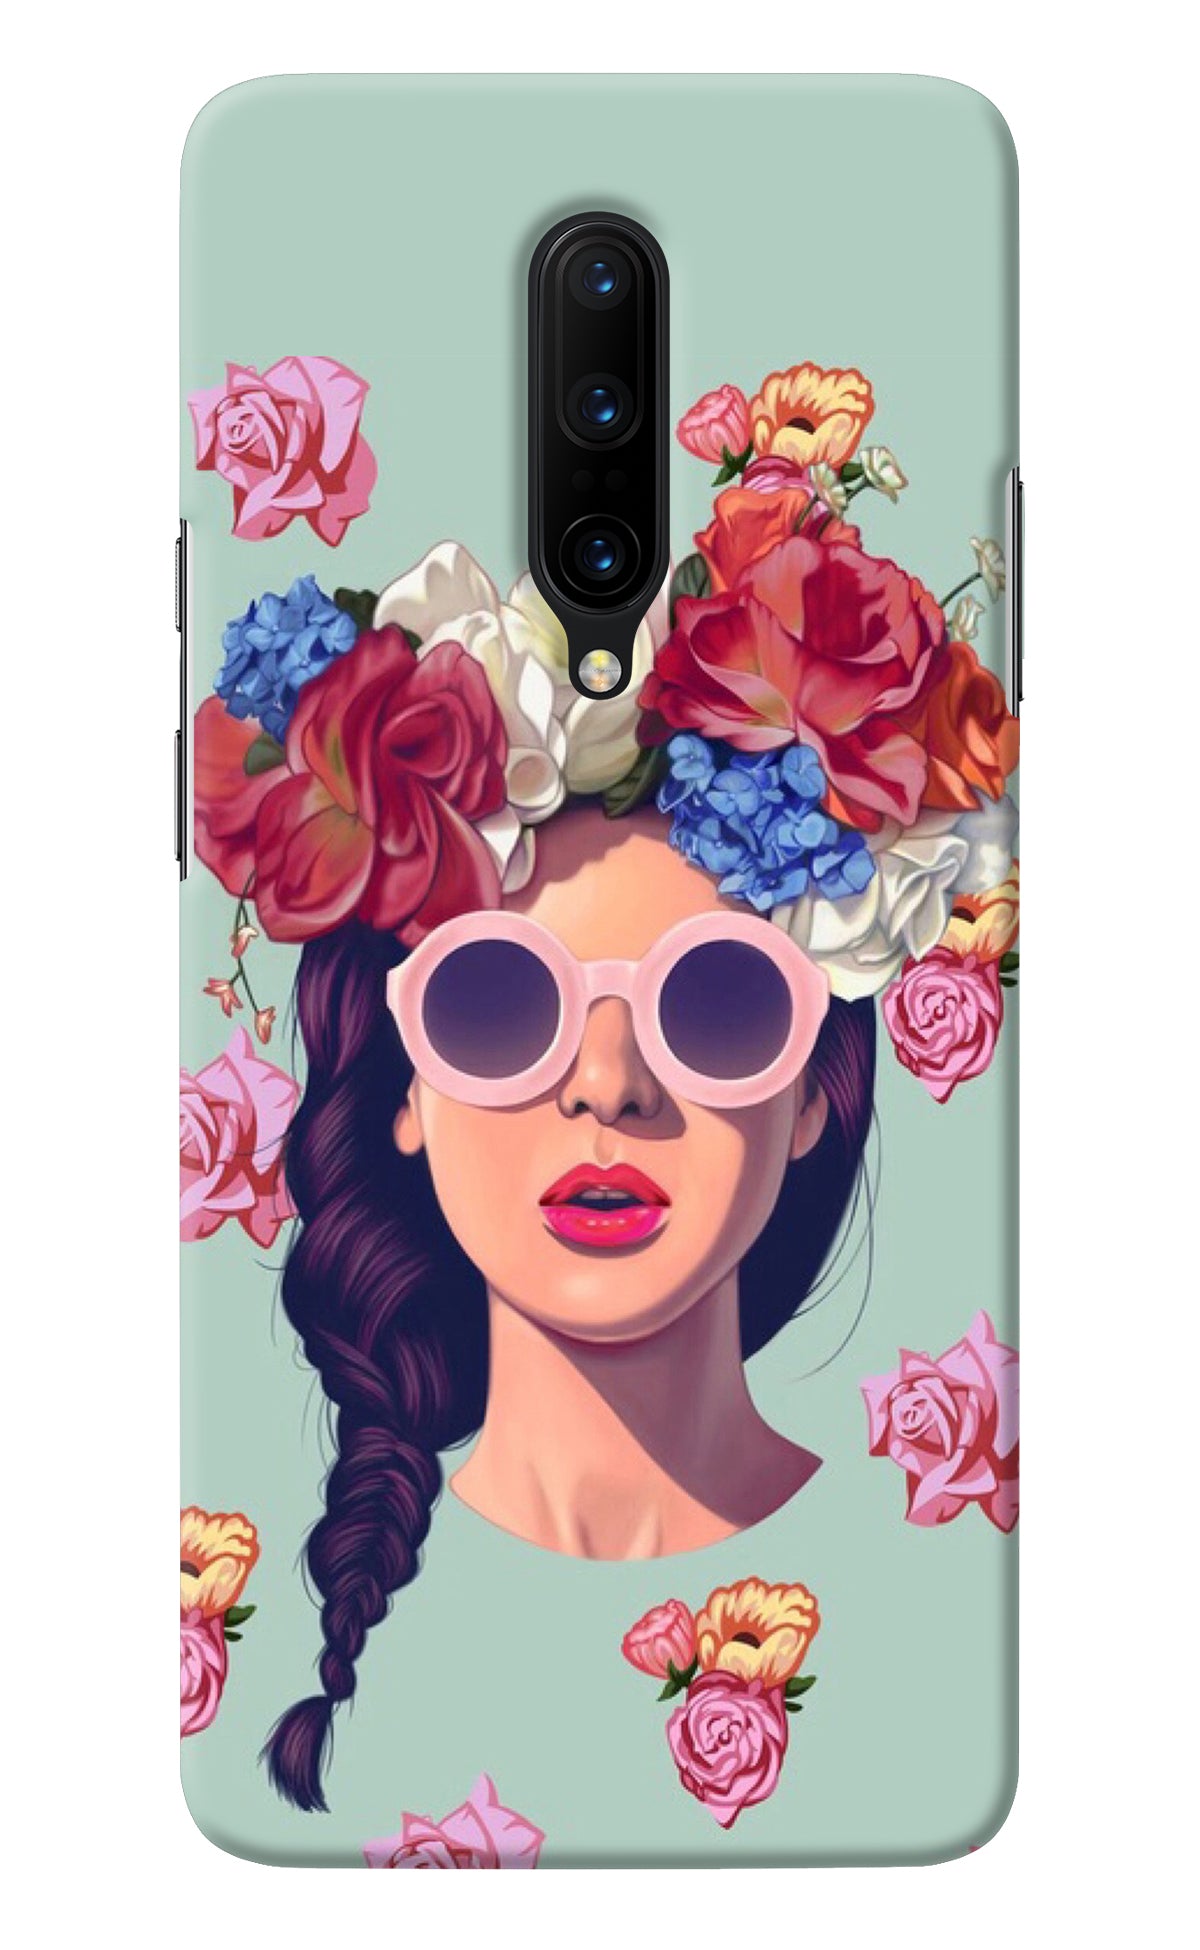 Pretty Girl Oneplus 7 Pro Back Cover